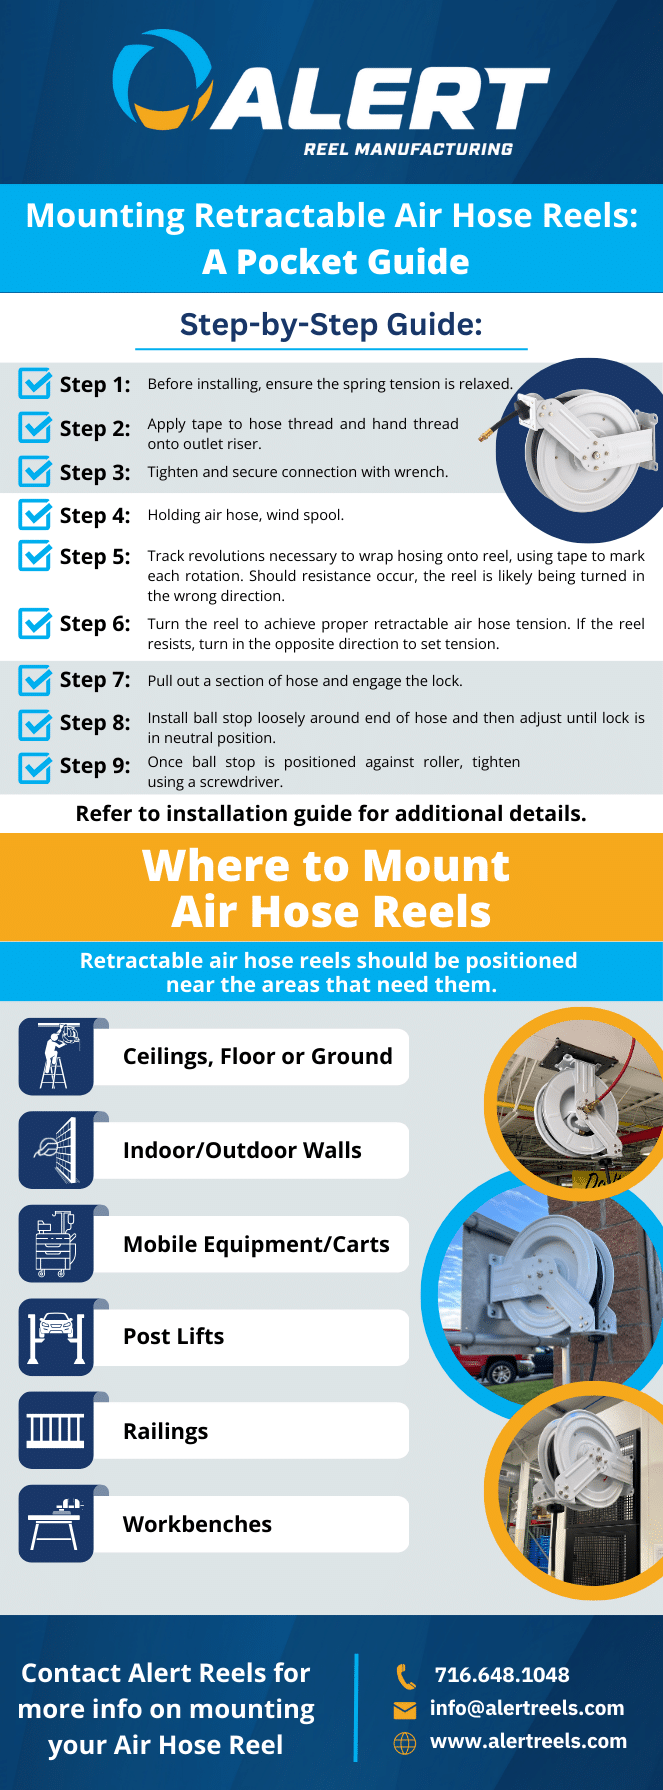 Mounting Retractable Air Hose Reels A Pocket Guide